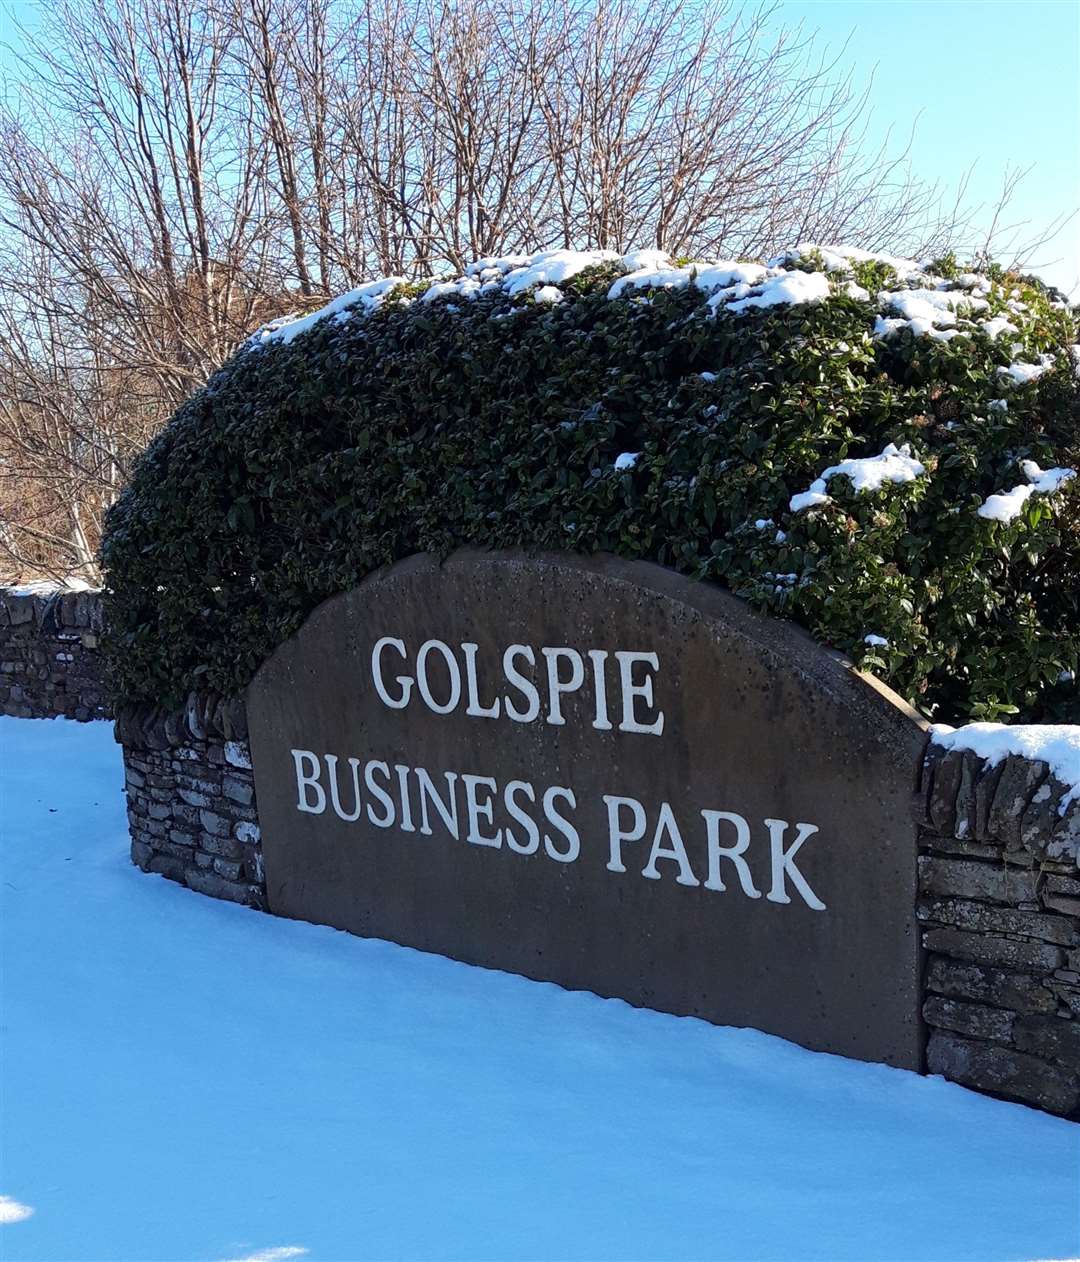 Highlands and Islands Enterprise has been working for some time to "ease" the classification that applies to some of Golspie Business Park's plots, in order to open them up for wider use